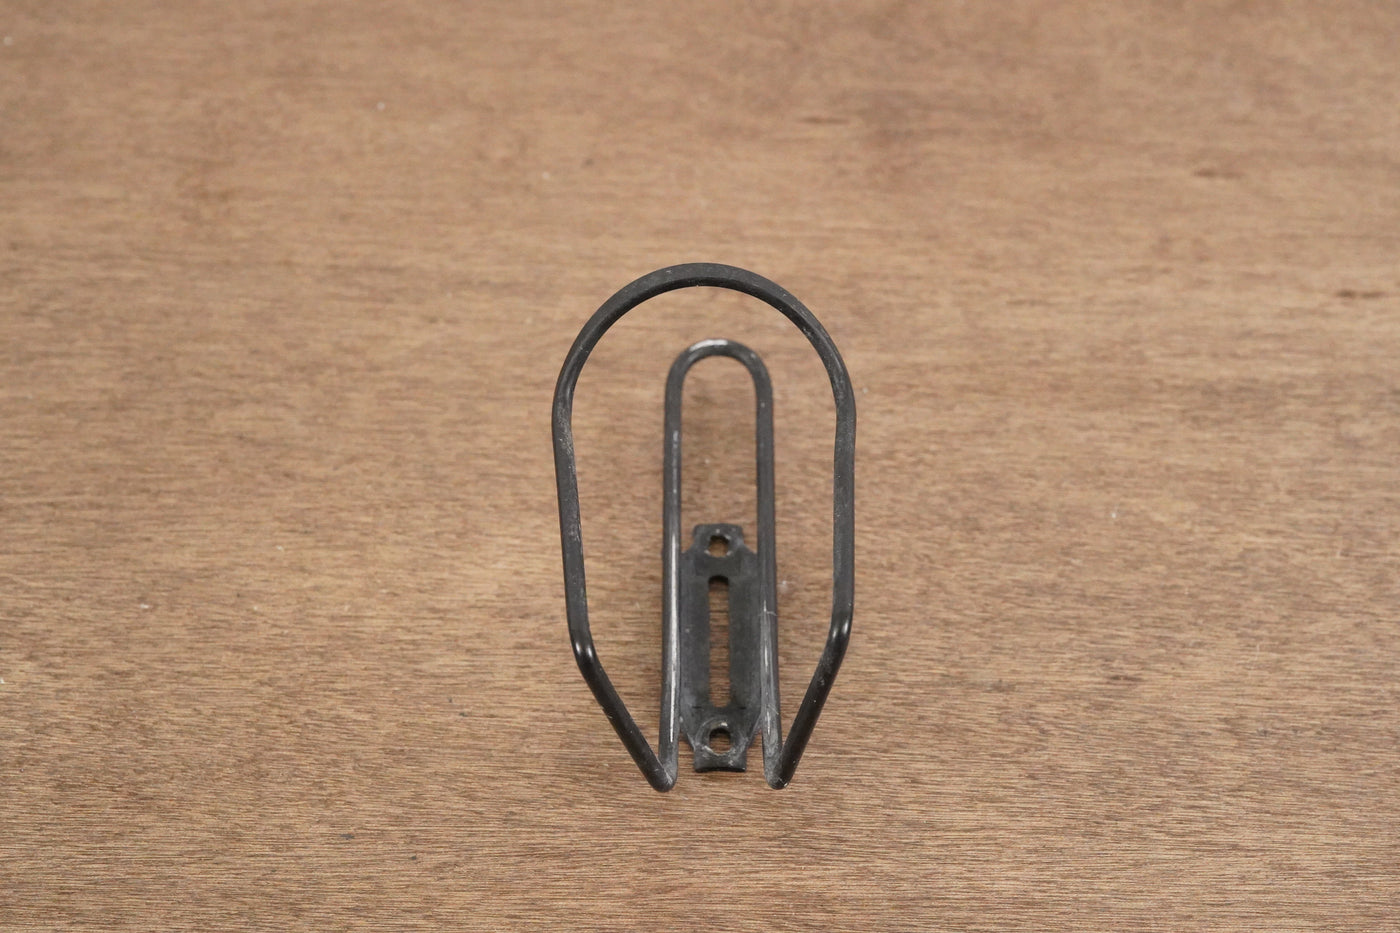 (1) Alloy Water Bottle Cage 47g